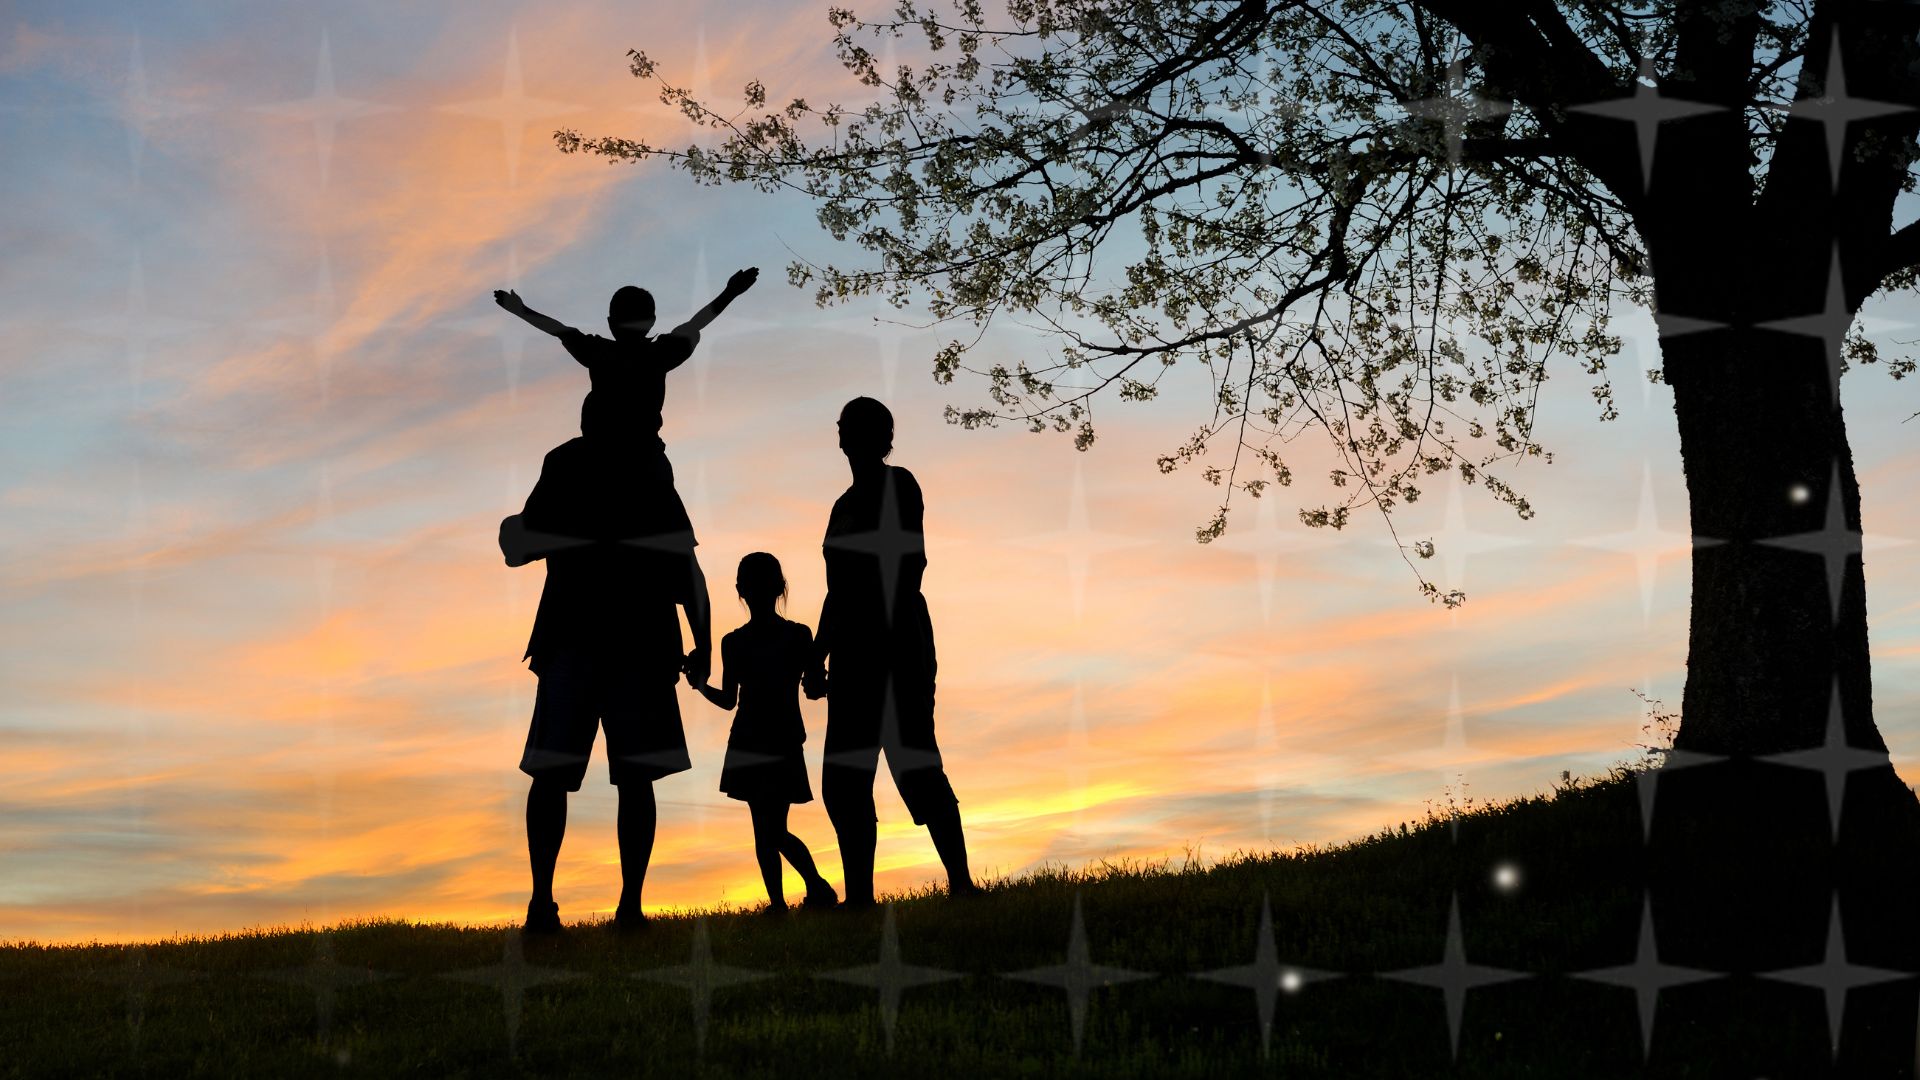 Silhouette of a family on a hillside by a tree, illustrating the new intestacy rules.